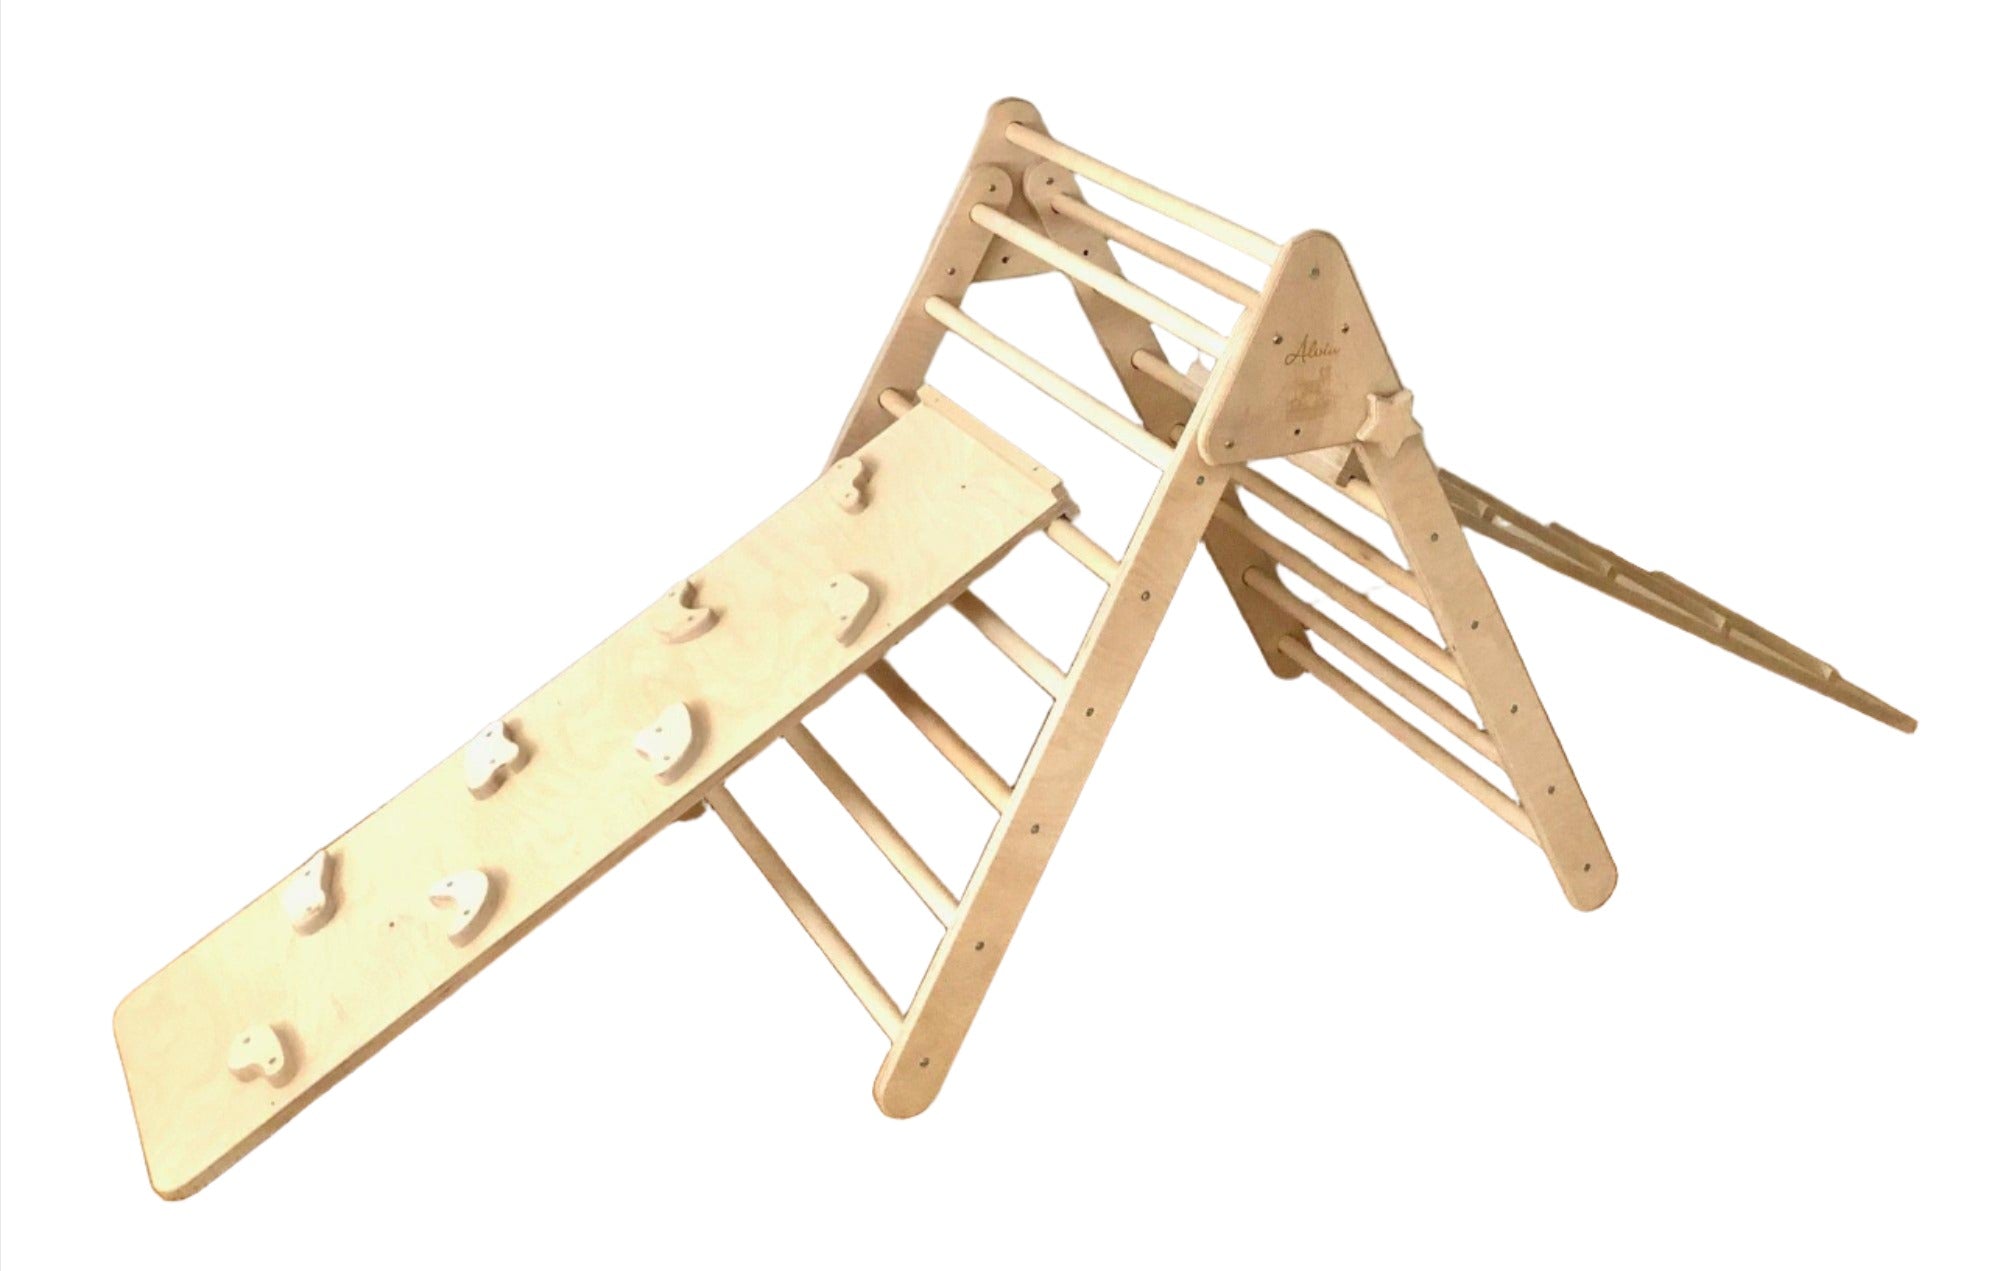 Foldable Climbing Triangle With 2 Ramps